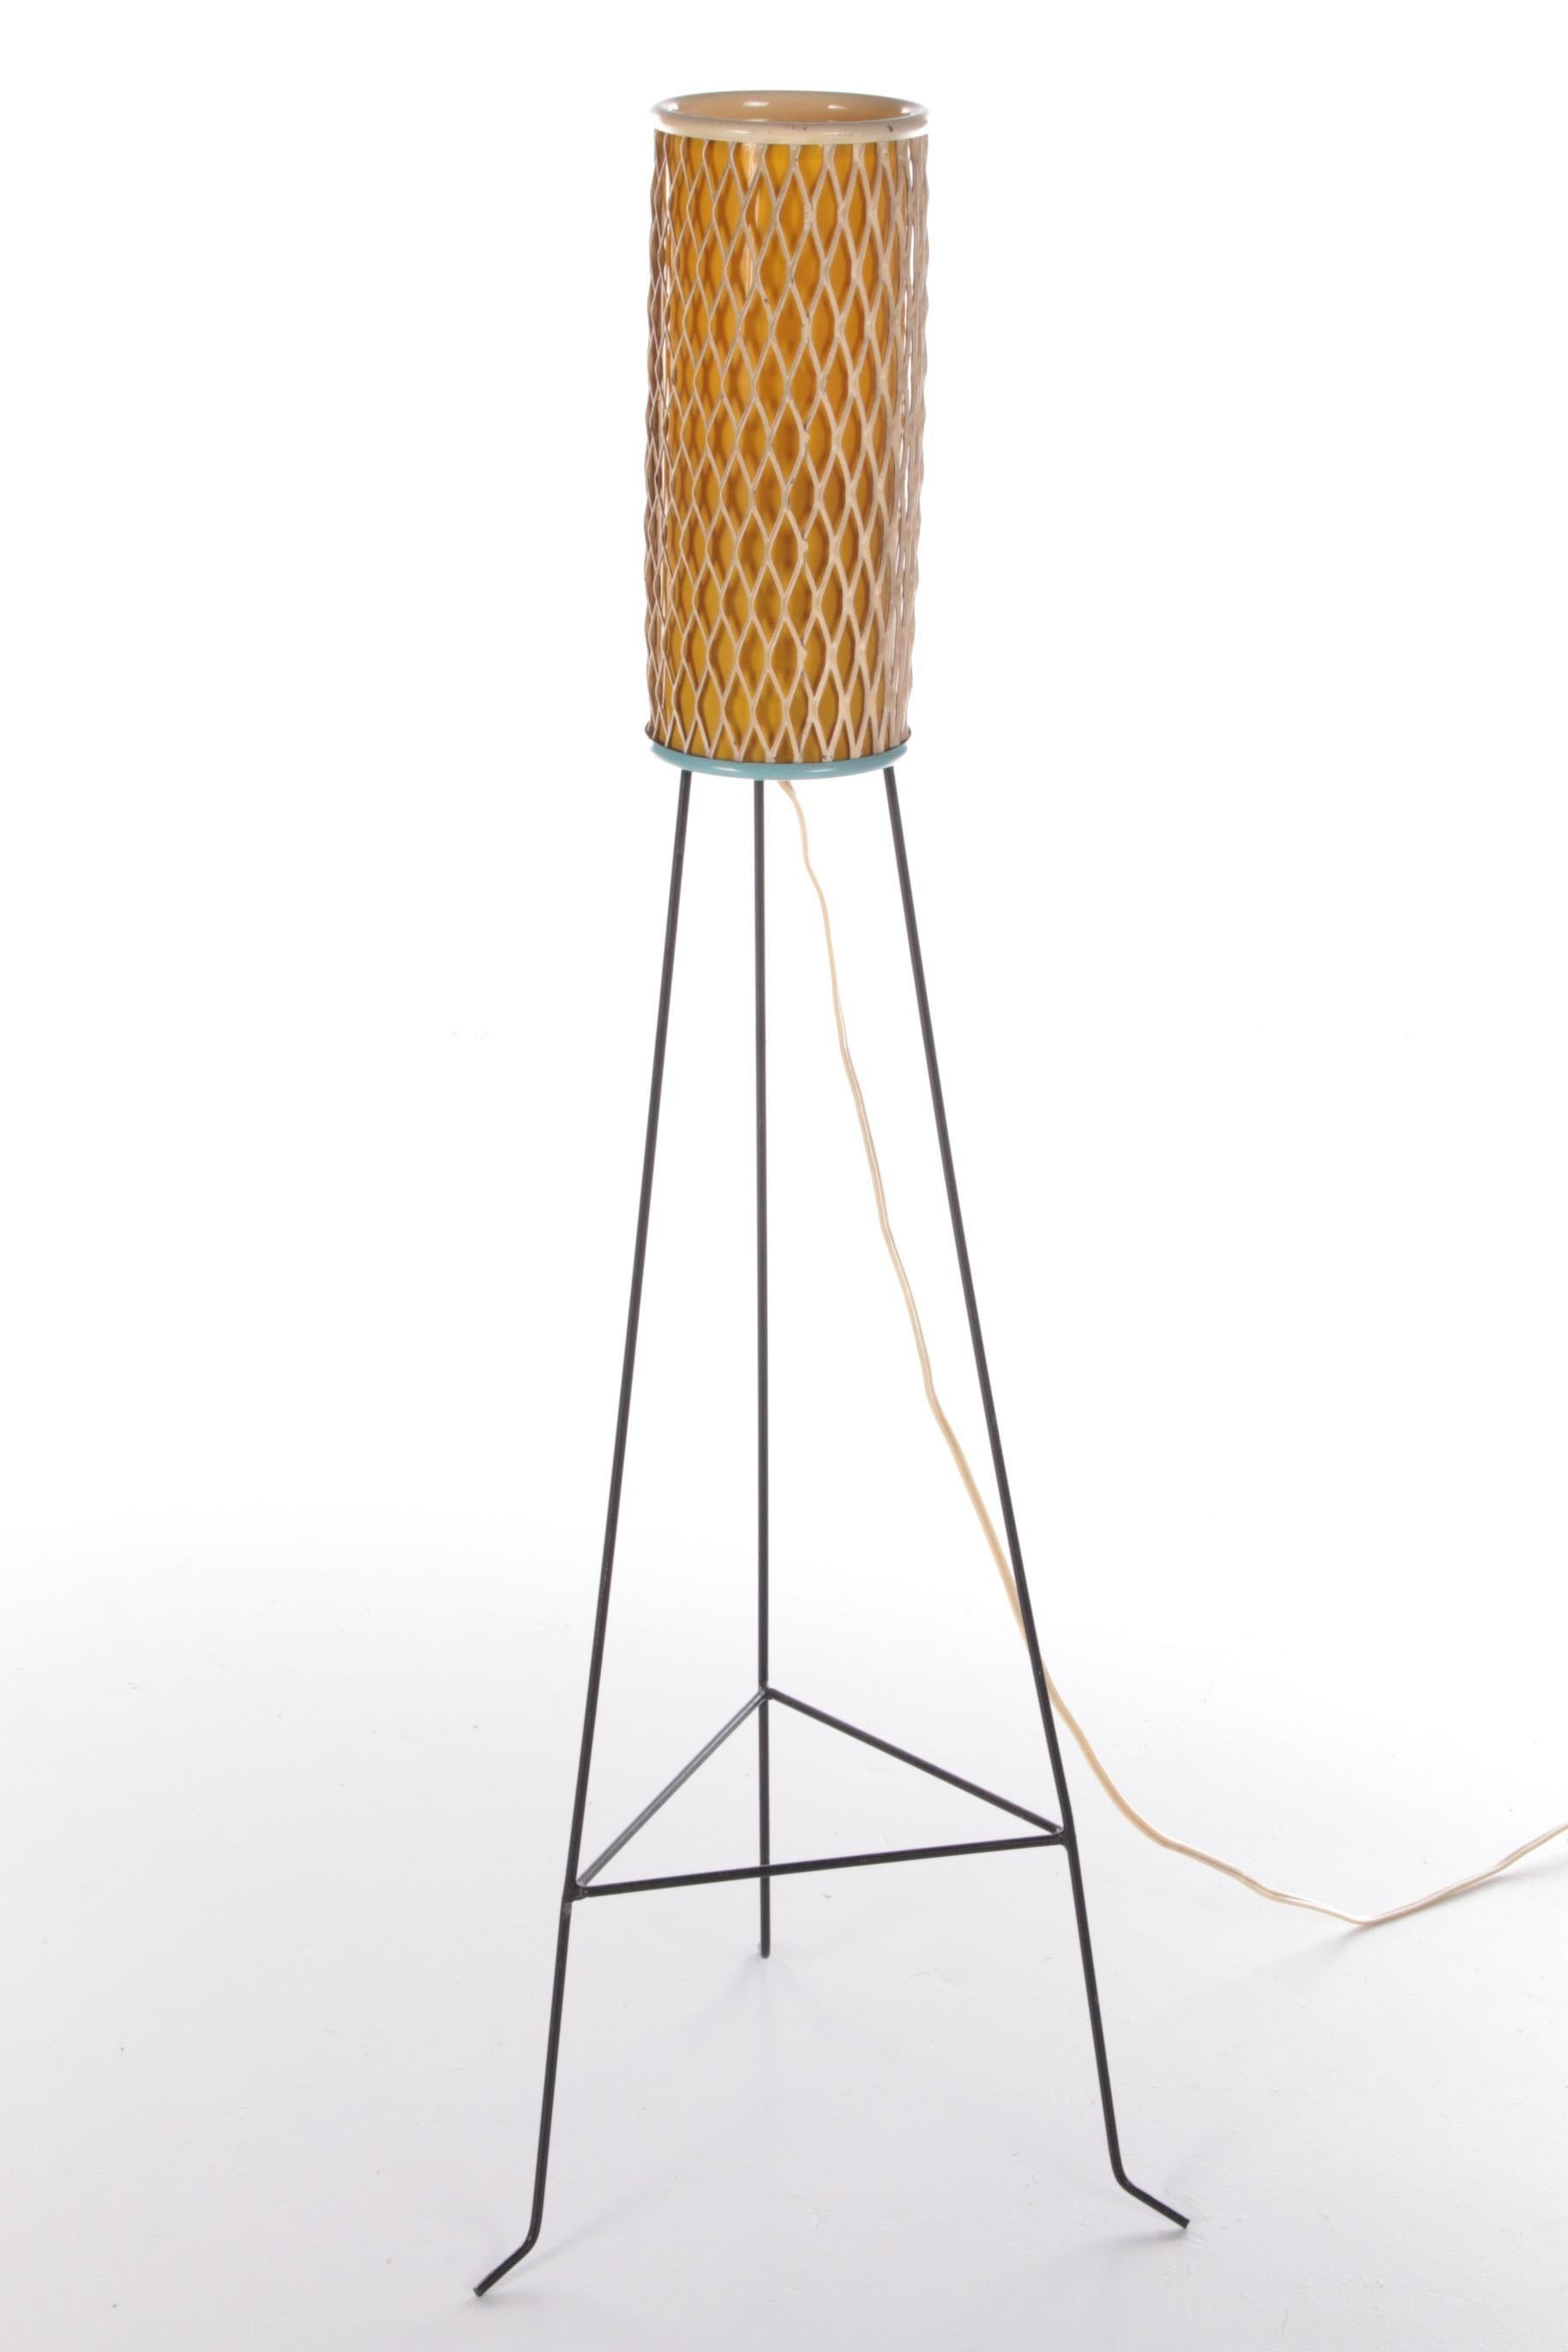 Vintage Rocket floor lamp by Josef Hurka Napako, 1950s


This special 'Rocket' floor lamp has made a long journey from the Czech Republic. The futuristic design is inspired by the rocket from the 50s. It was during this time that people started